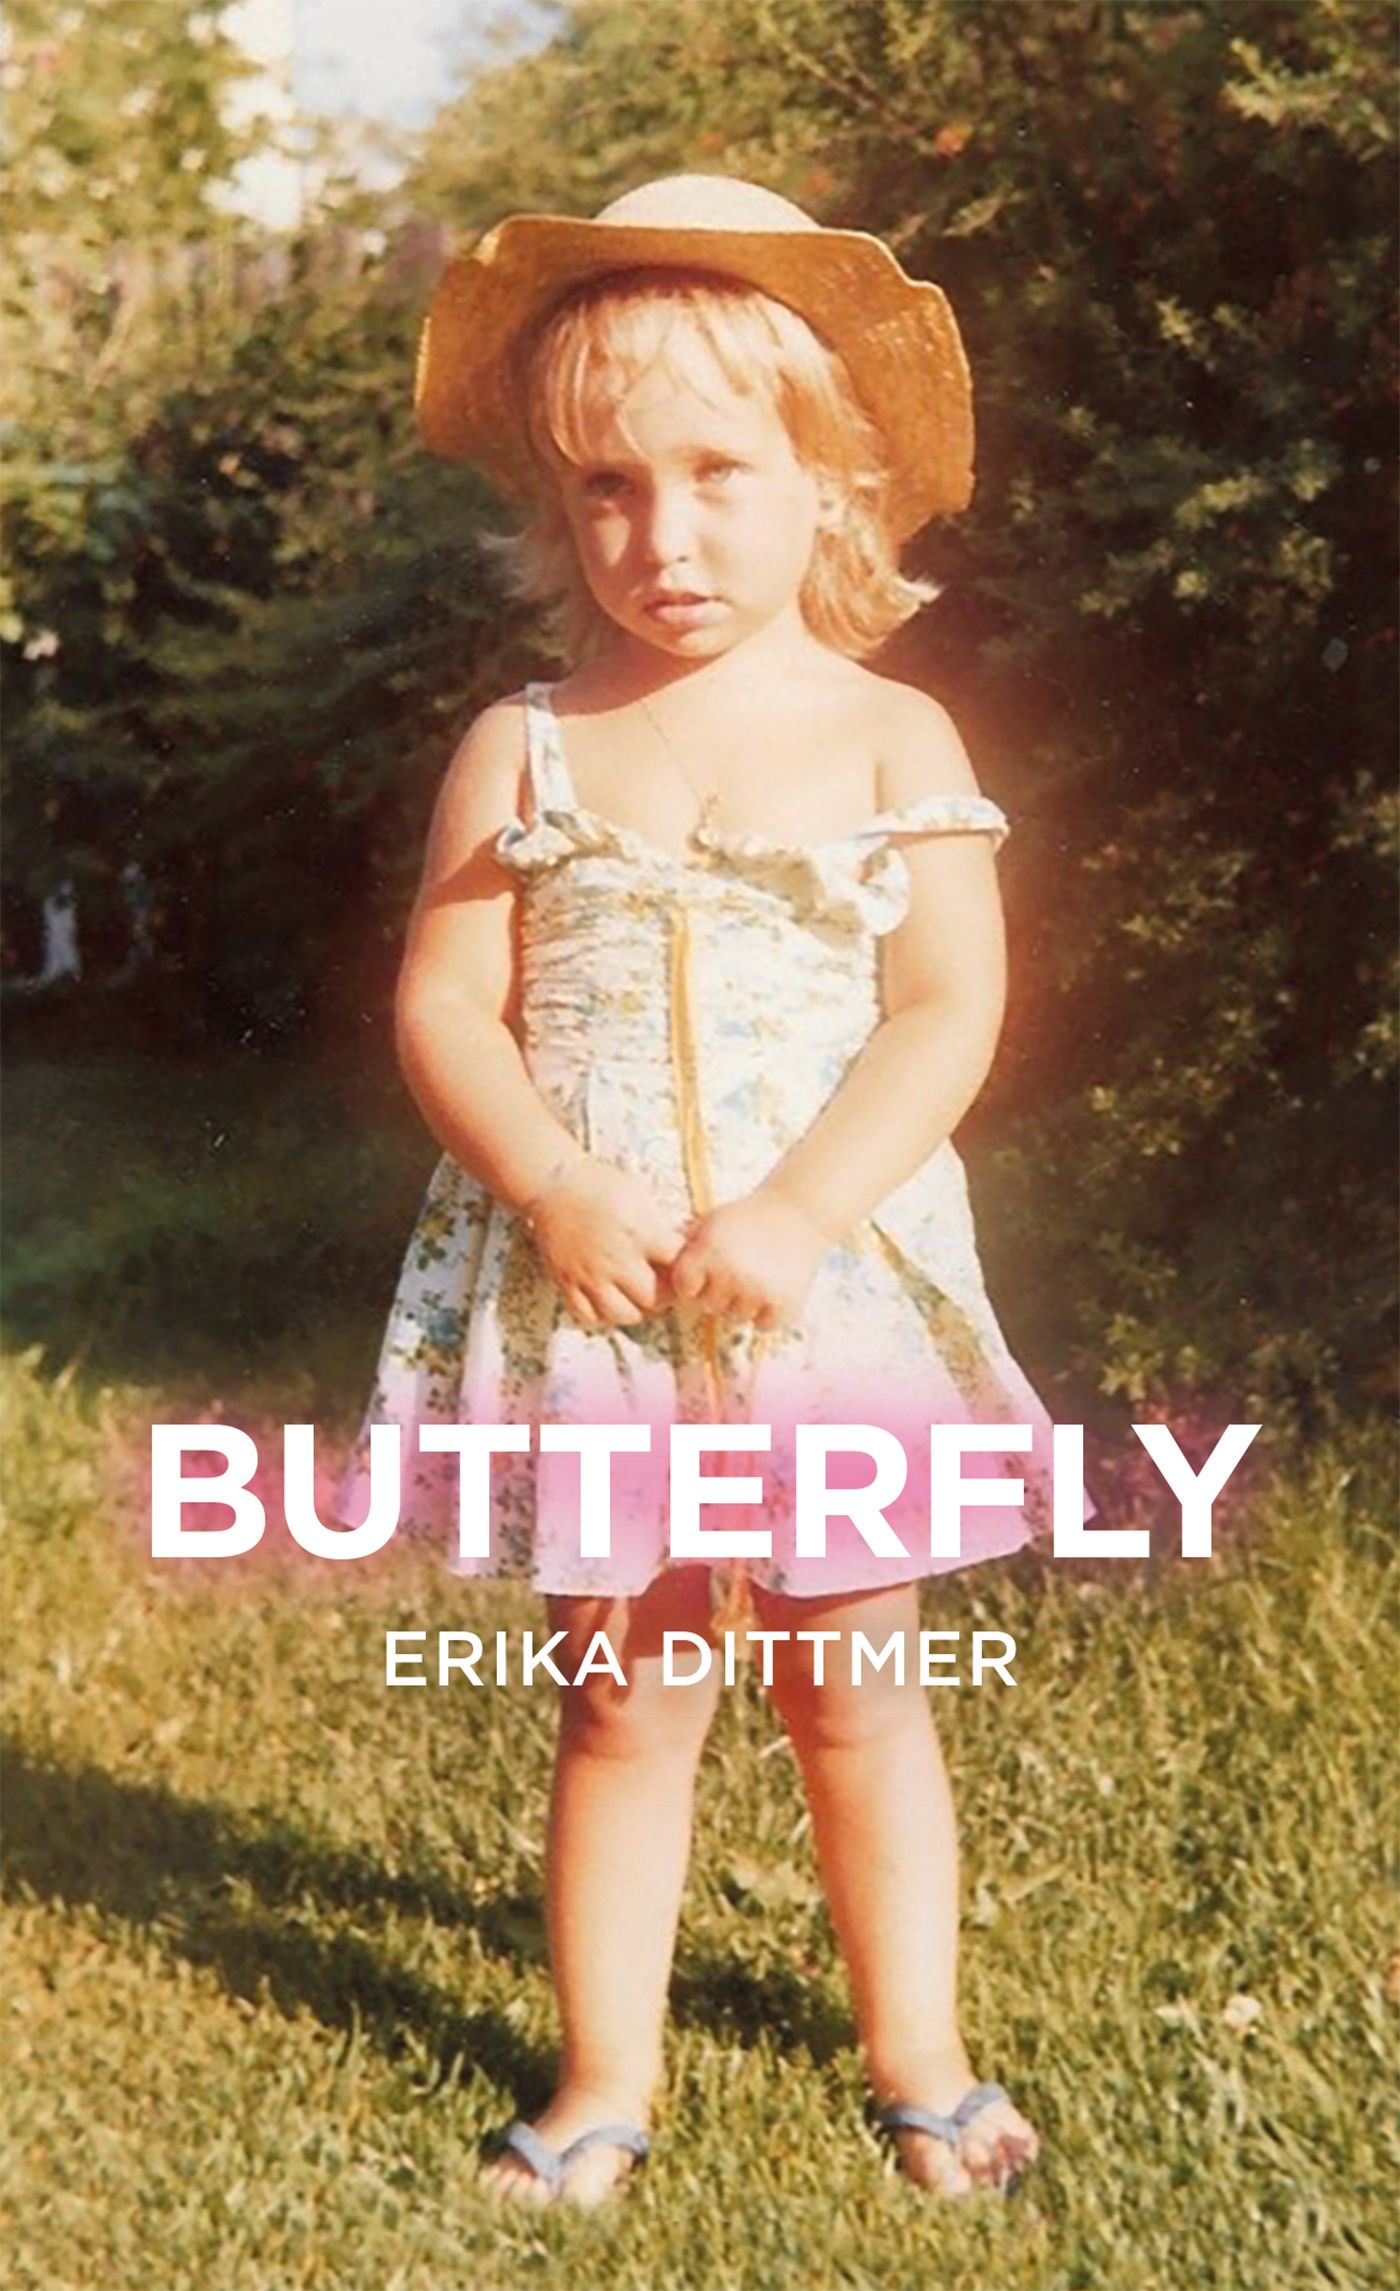 Butterfly, eBook by Erika Dittmer